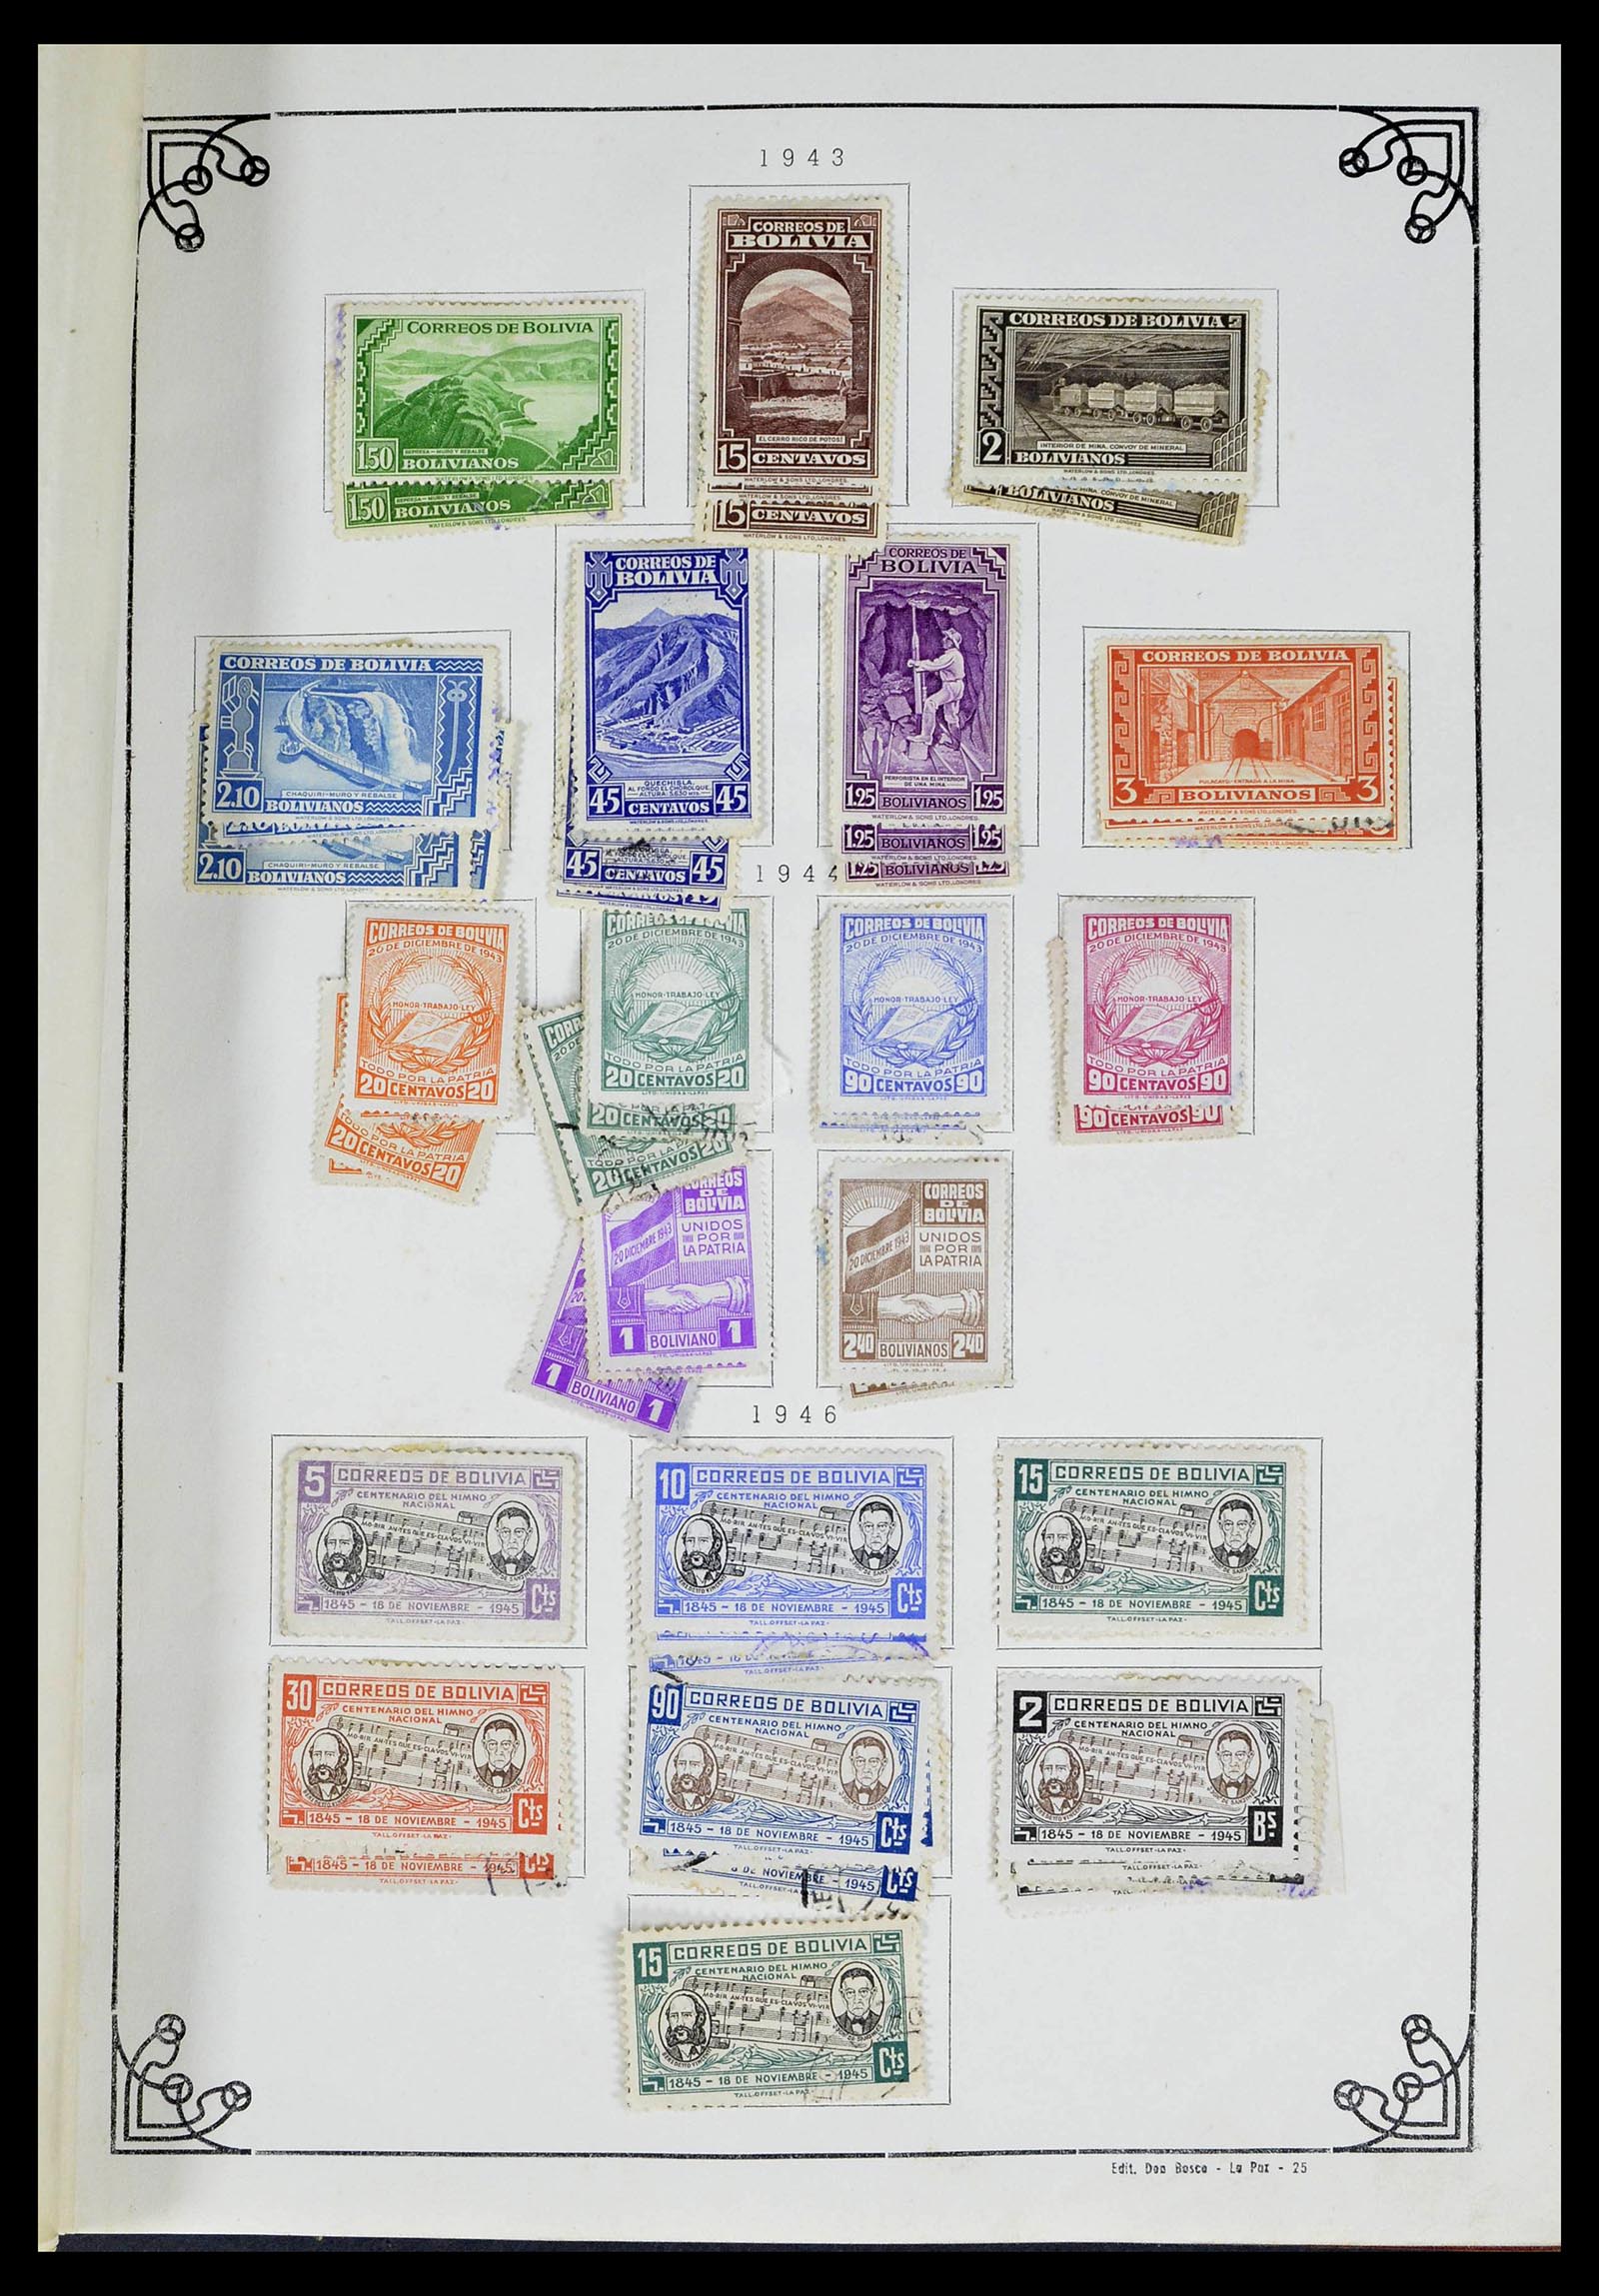 39224 0031 - Stamp collection 39224 Bolivia 1849-1955.